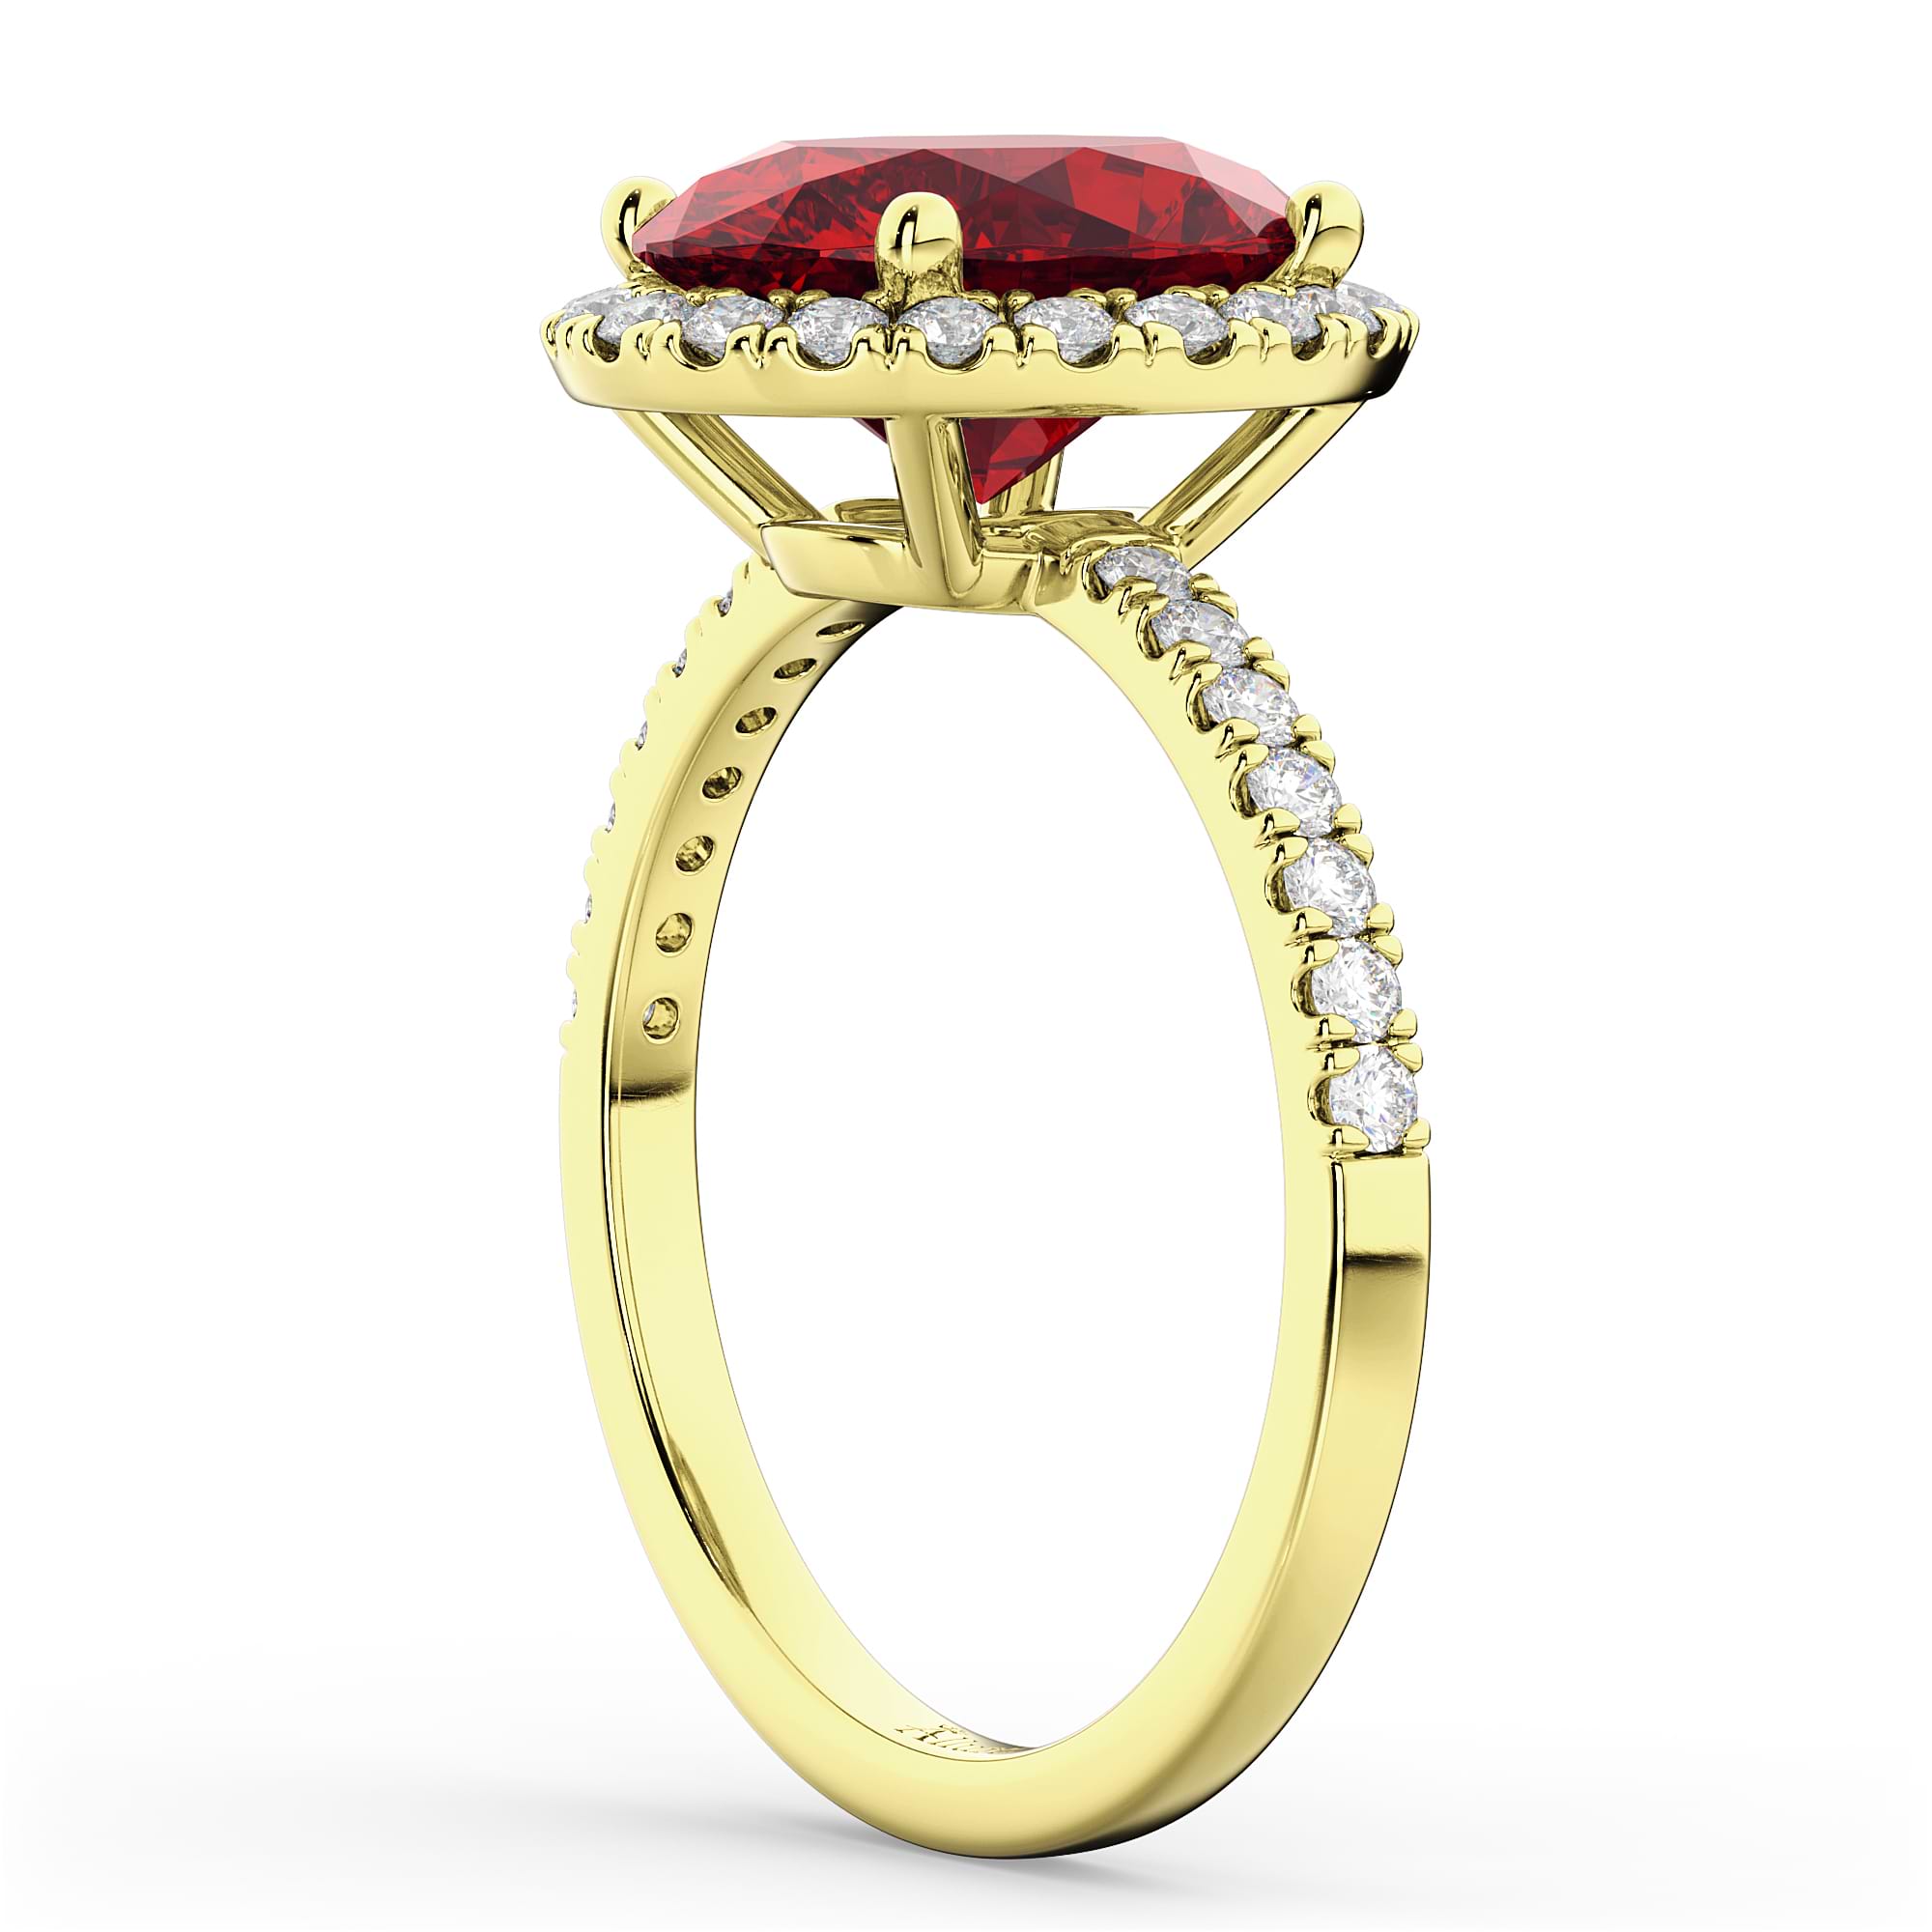 Oval Cut Halo Ruby & Diamond Engagement Ring 14K Yellow Gold 3.66ct